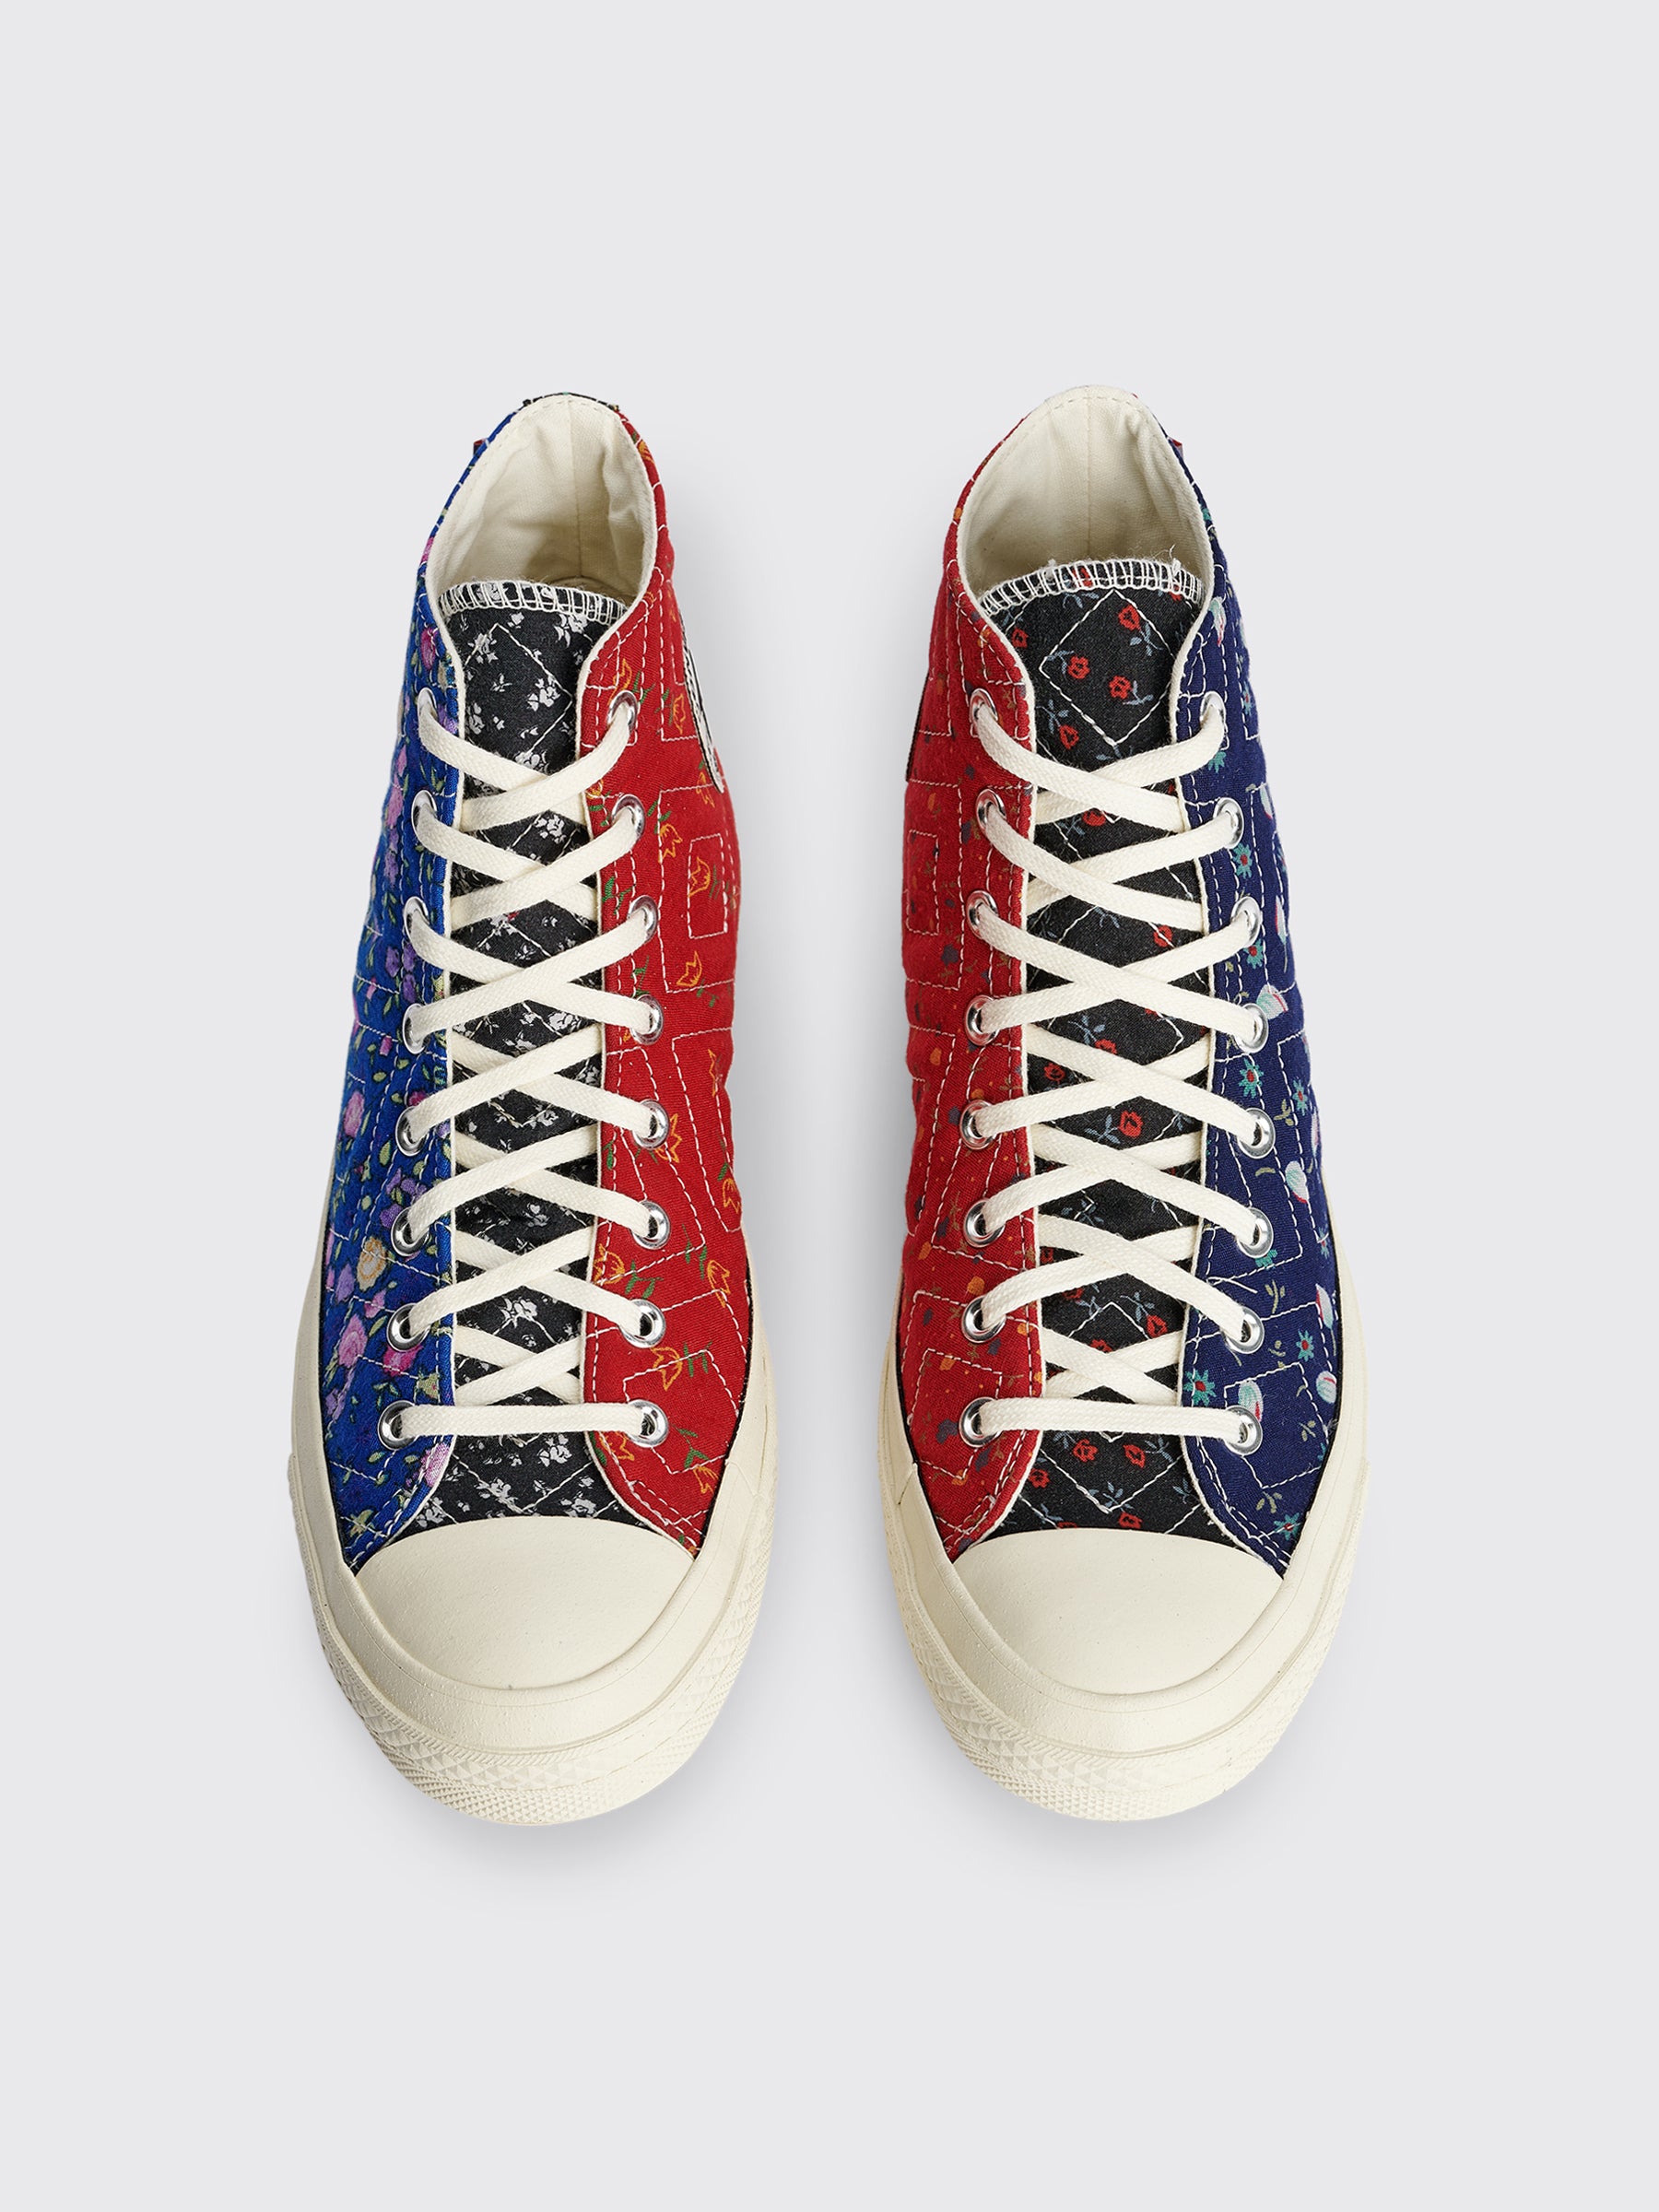 Converse x Beyond Retro Upcycled Floral Chuck 70 Hi Black / Red / Blue